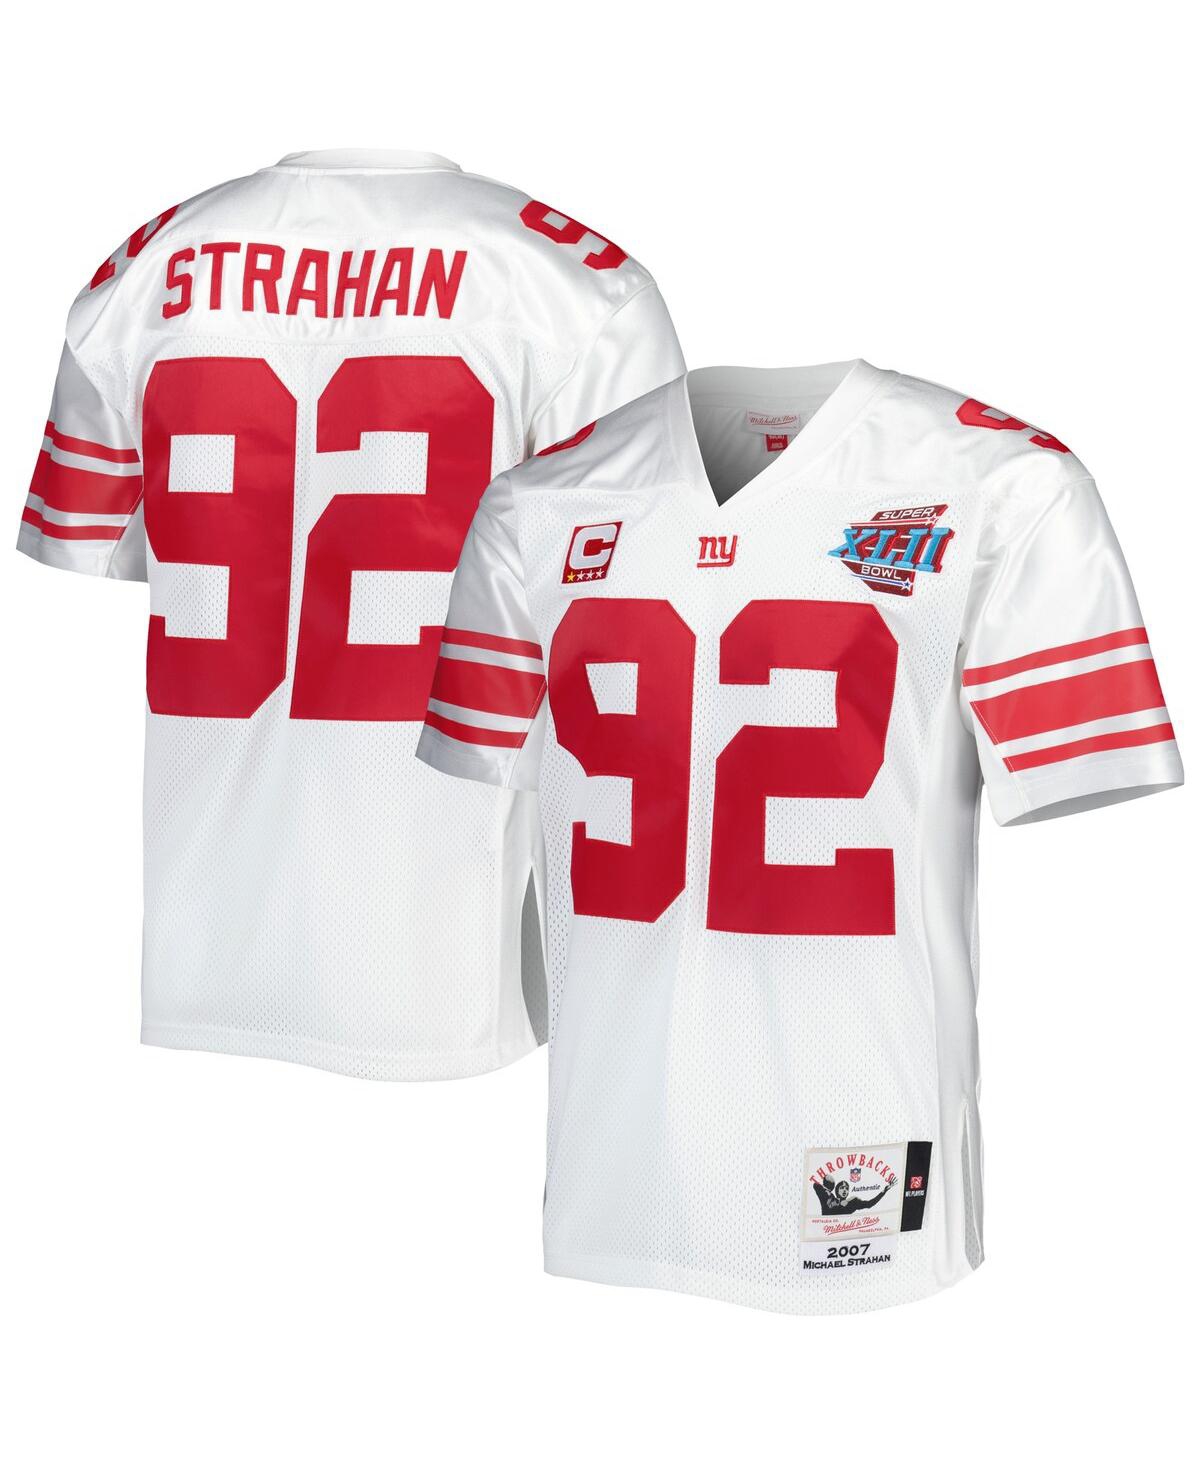 Men's Mitchell & Ness Michael Strahan White New York Giants 2007 Authentic Throwback Retired Player Jersey - White